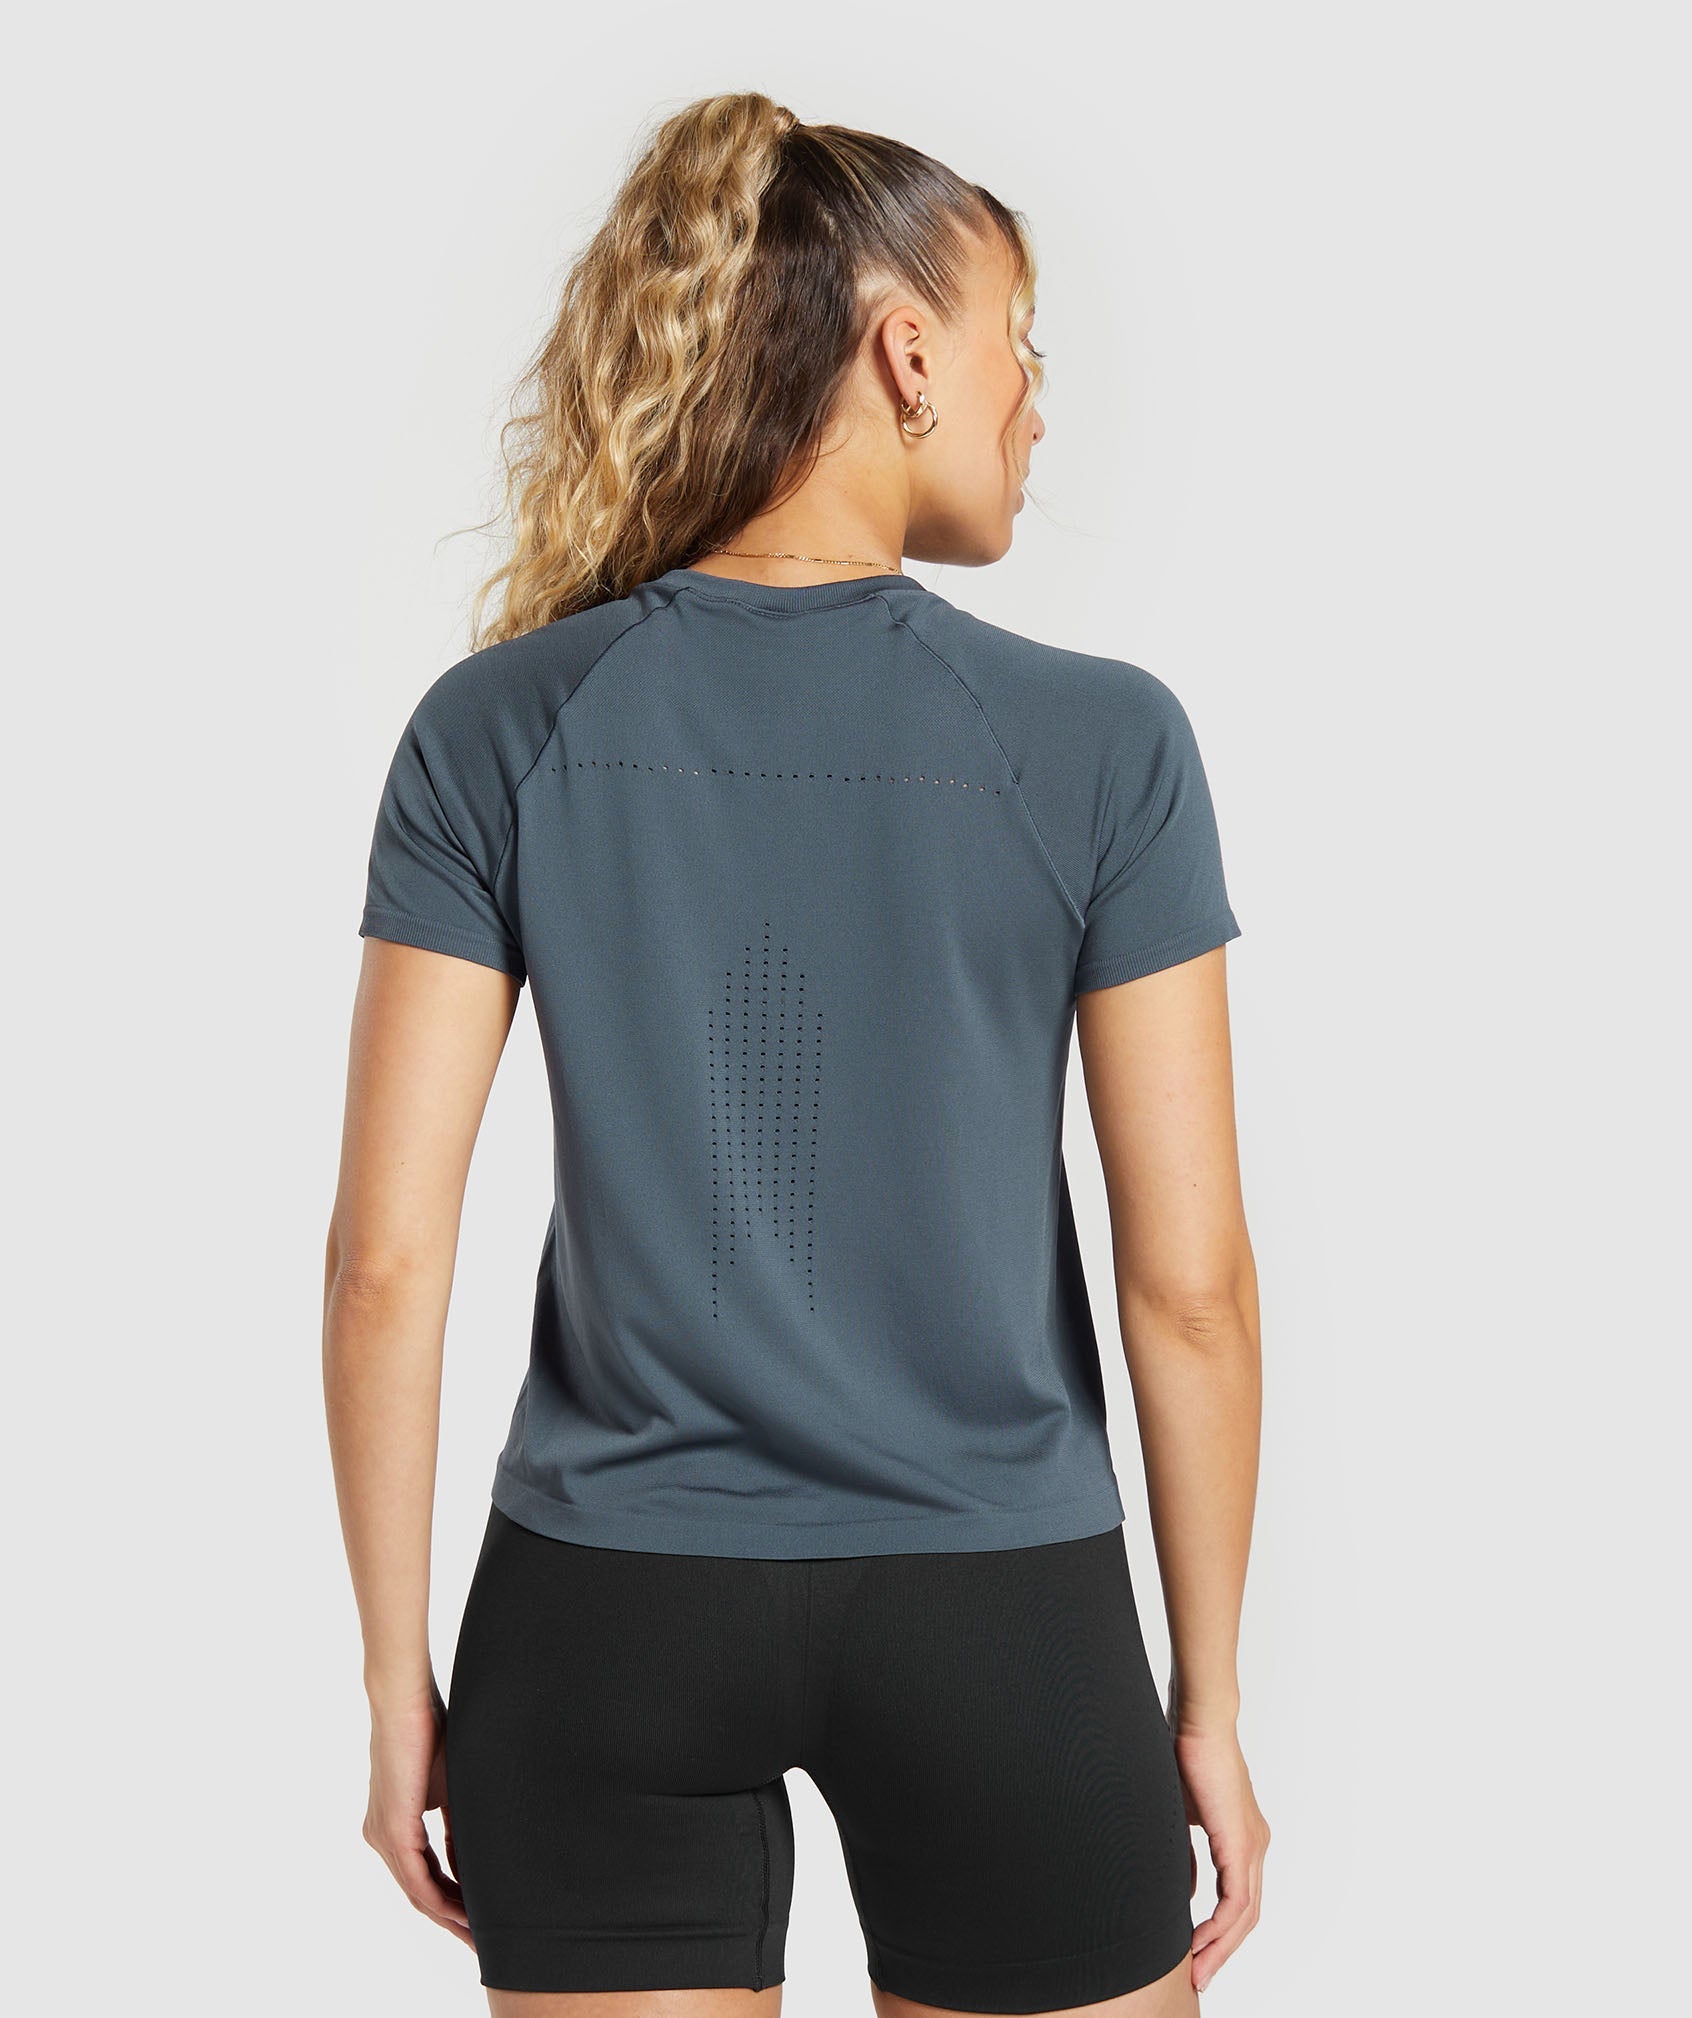 Gymshark Everyday Seamless Tight Fit Tee - Navy